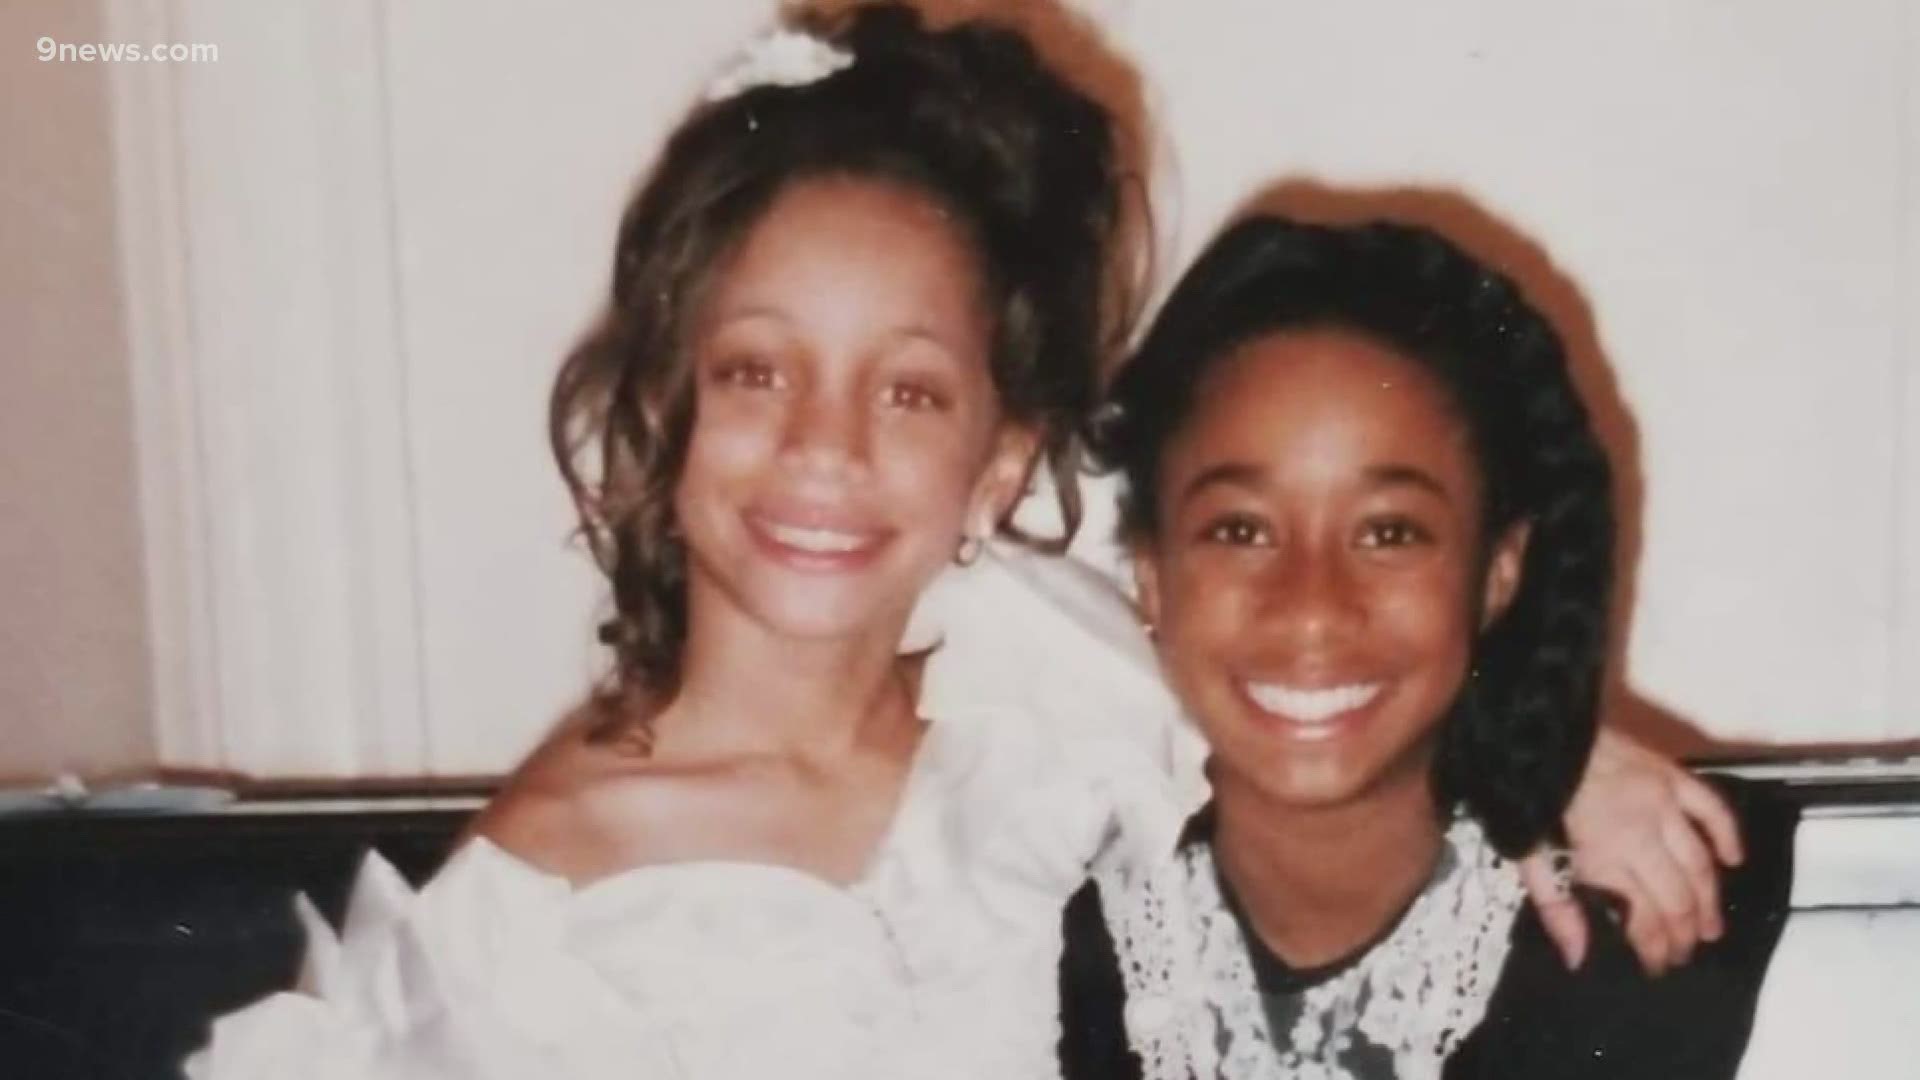 Black women speak up about experiencing childhood racism while growing up.